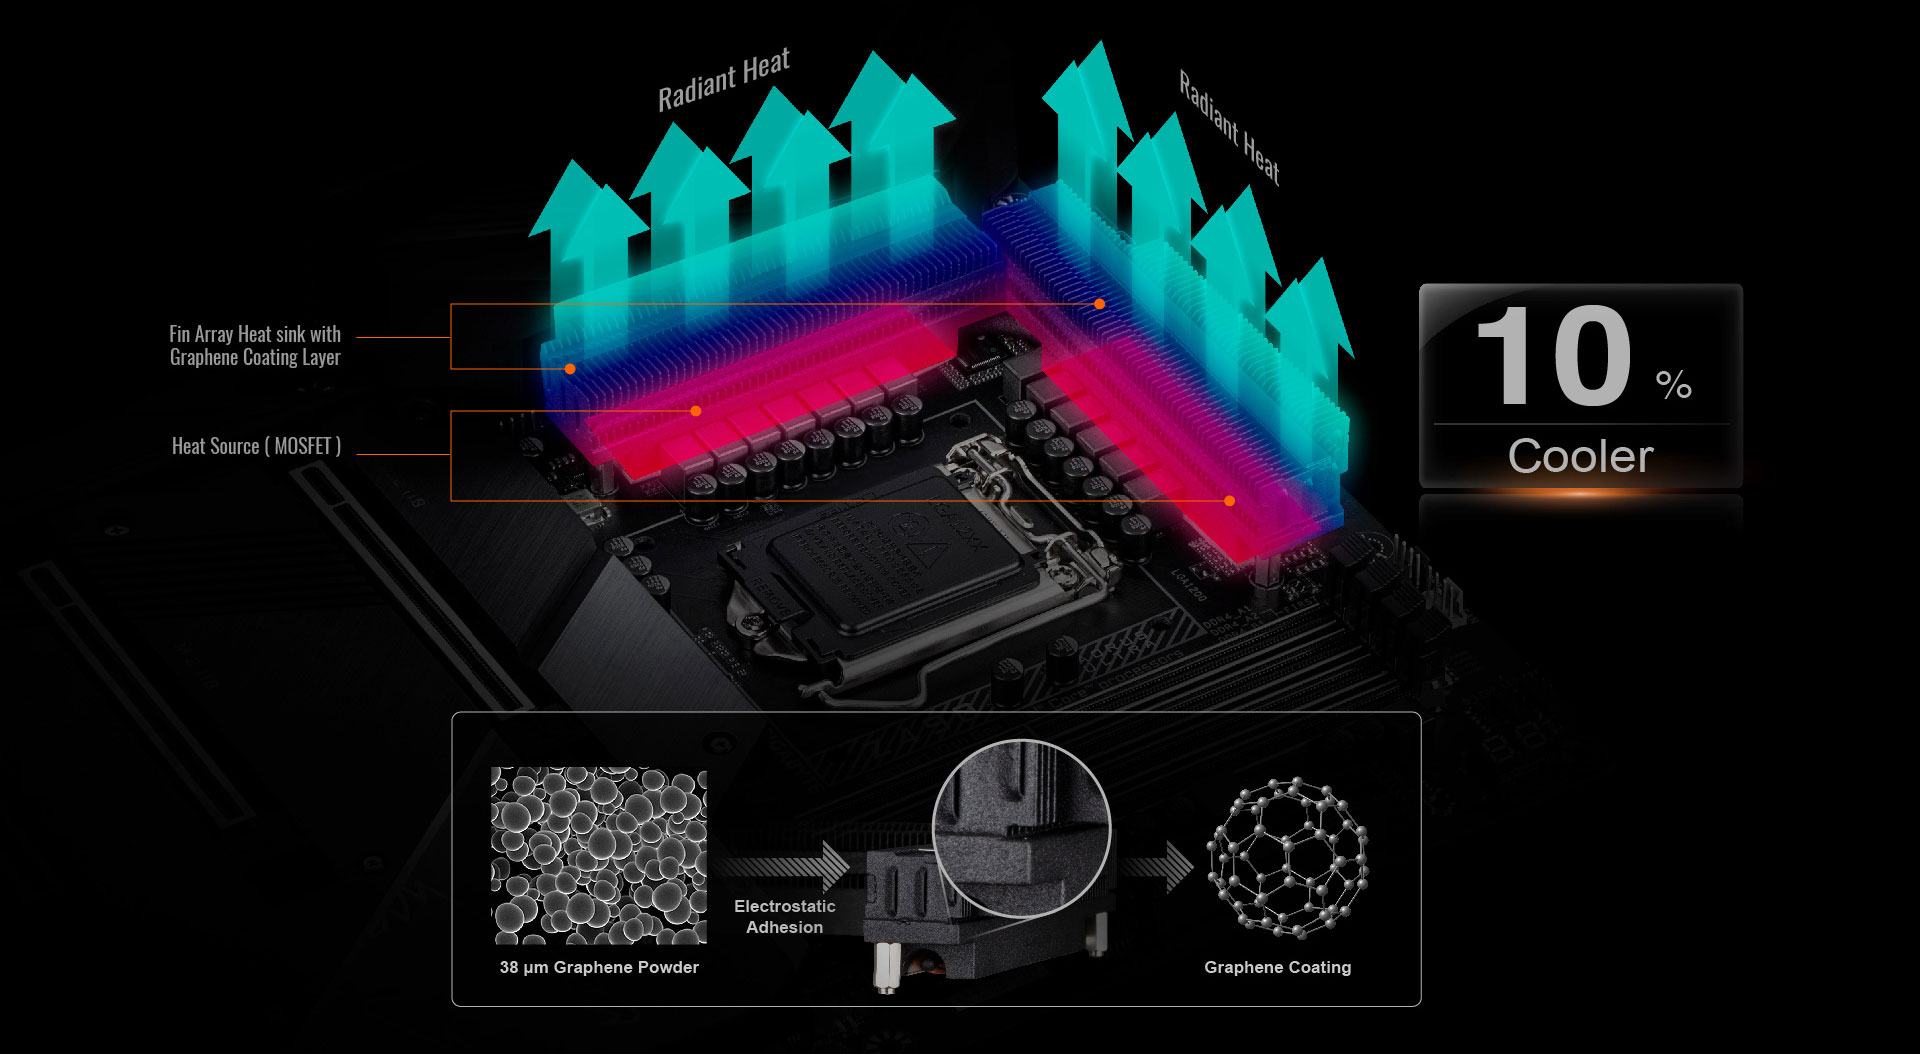 38 graphene power of the motherboard